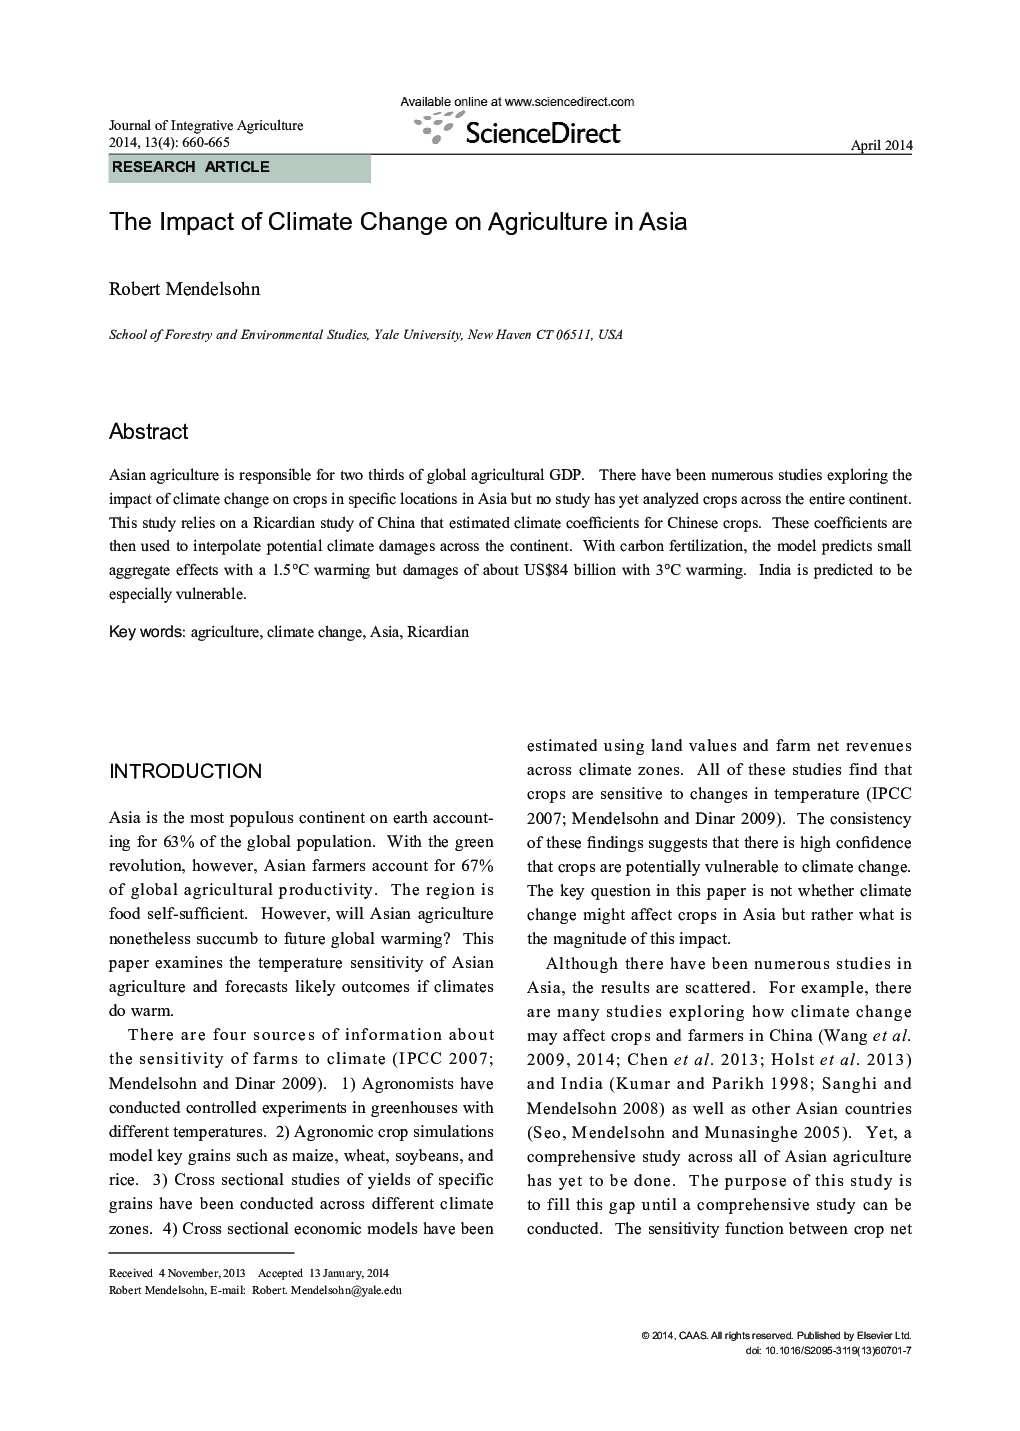 The Impact of Climate Change on Agriculture in Asia